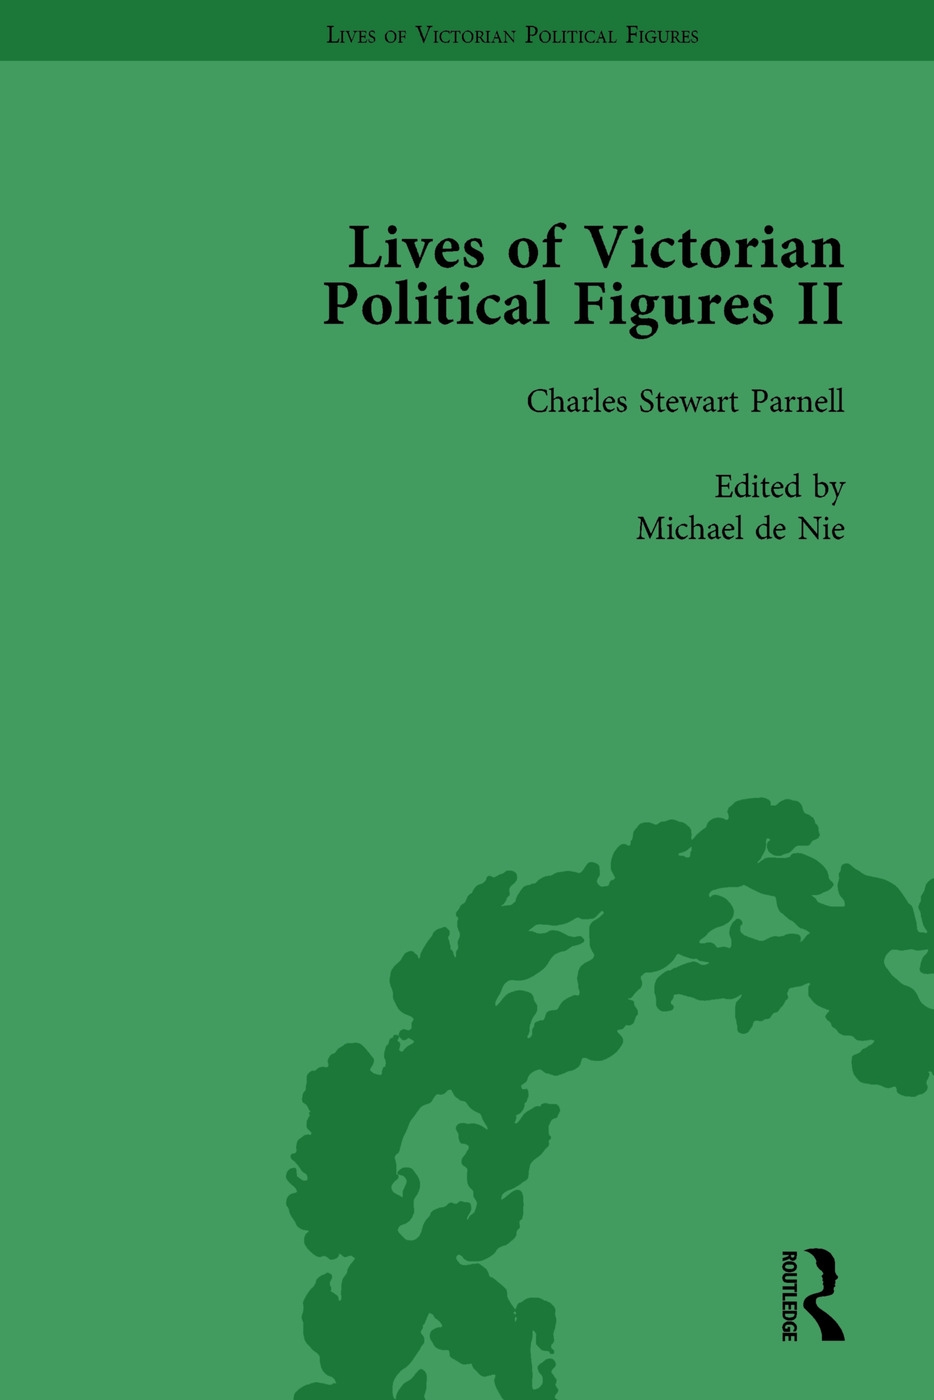 Lives of Victorian Political Figures, Part II, Volume 2: Daniel O’’Connell, James Bronterre O’’Brien, Charles Stewart Parnell and Michael Davitt by Thei